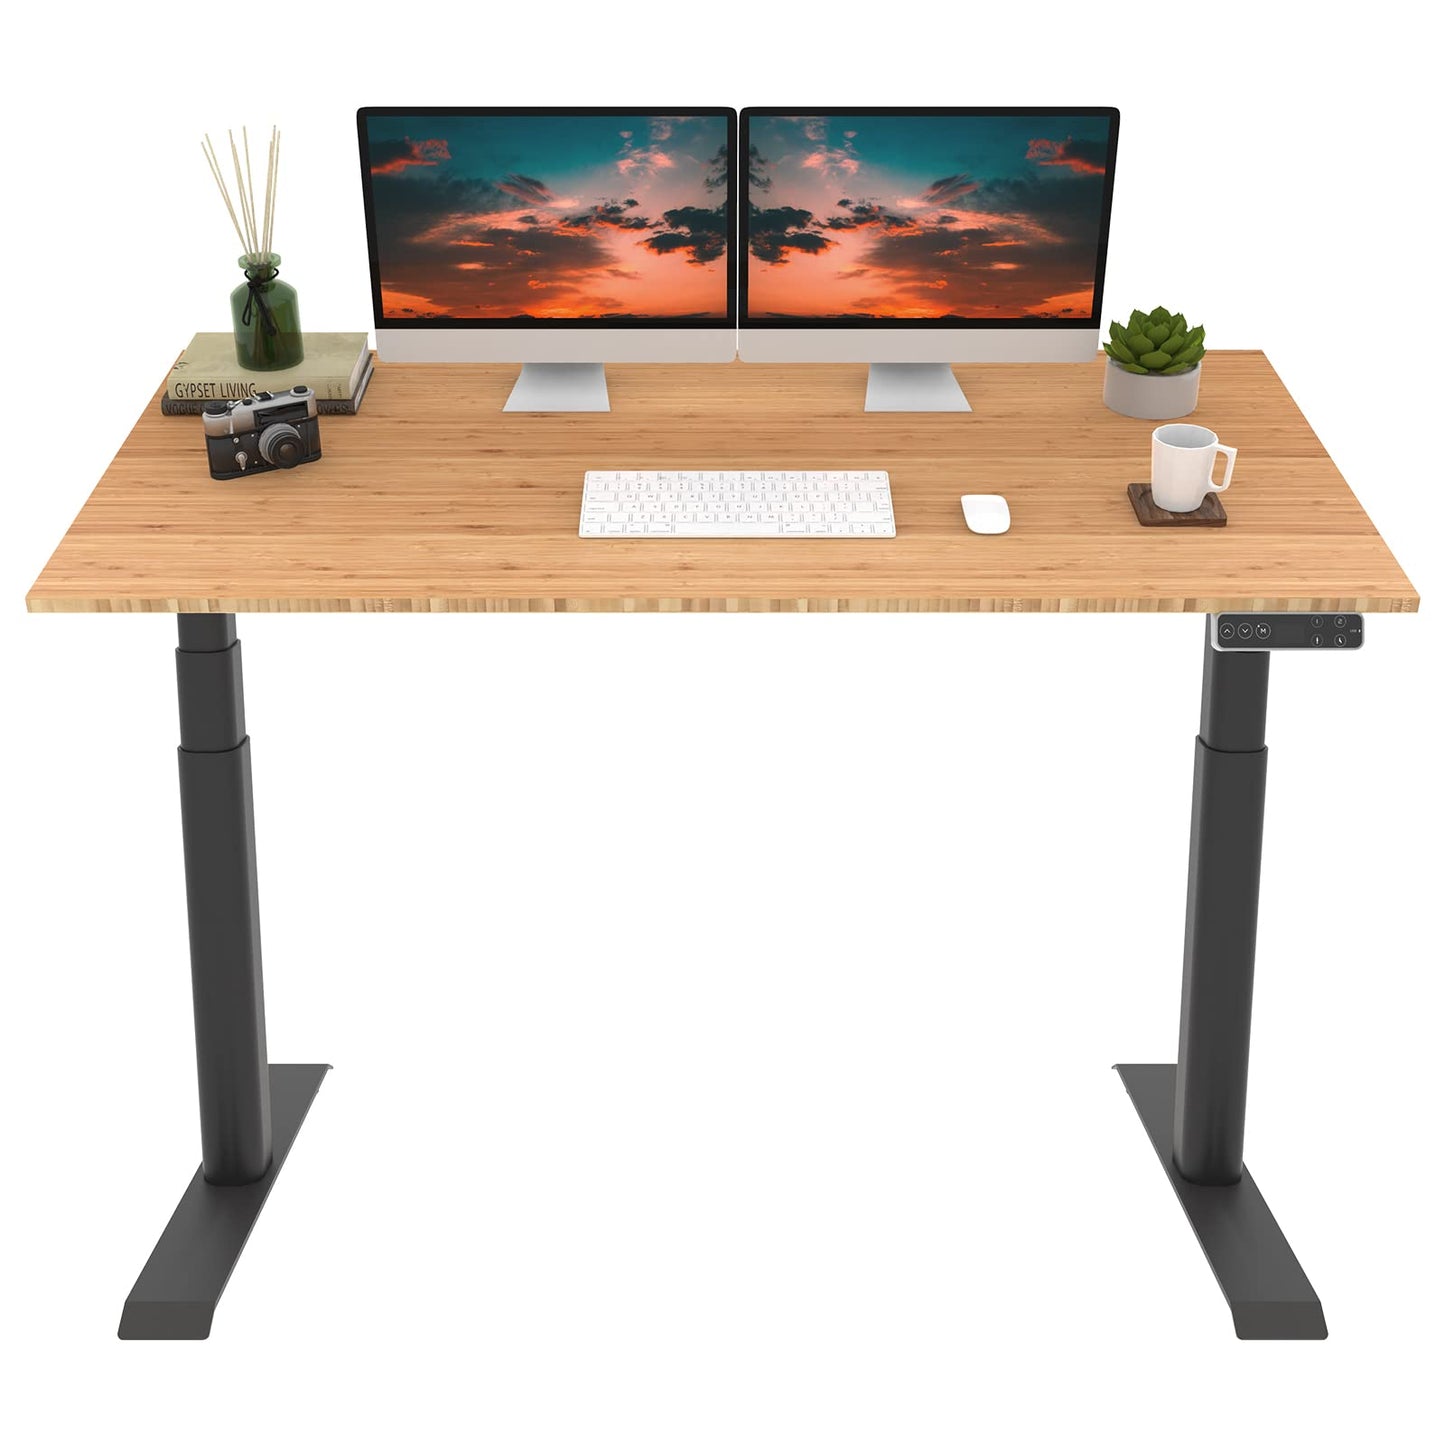 FLEXISPOT E8 Dual Motor 3 Stages Bamboo Electric Standing Desk 60x30 Inch Oval Leg Whole-Piece Board Height Adjustable Desk Electric Stand Up Desk